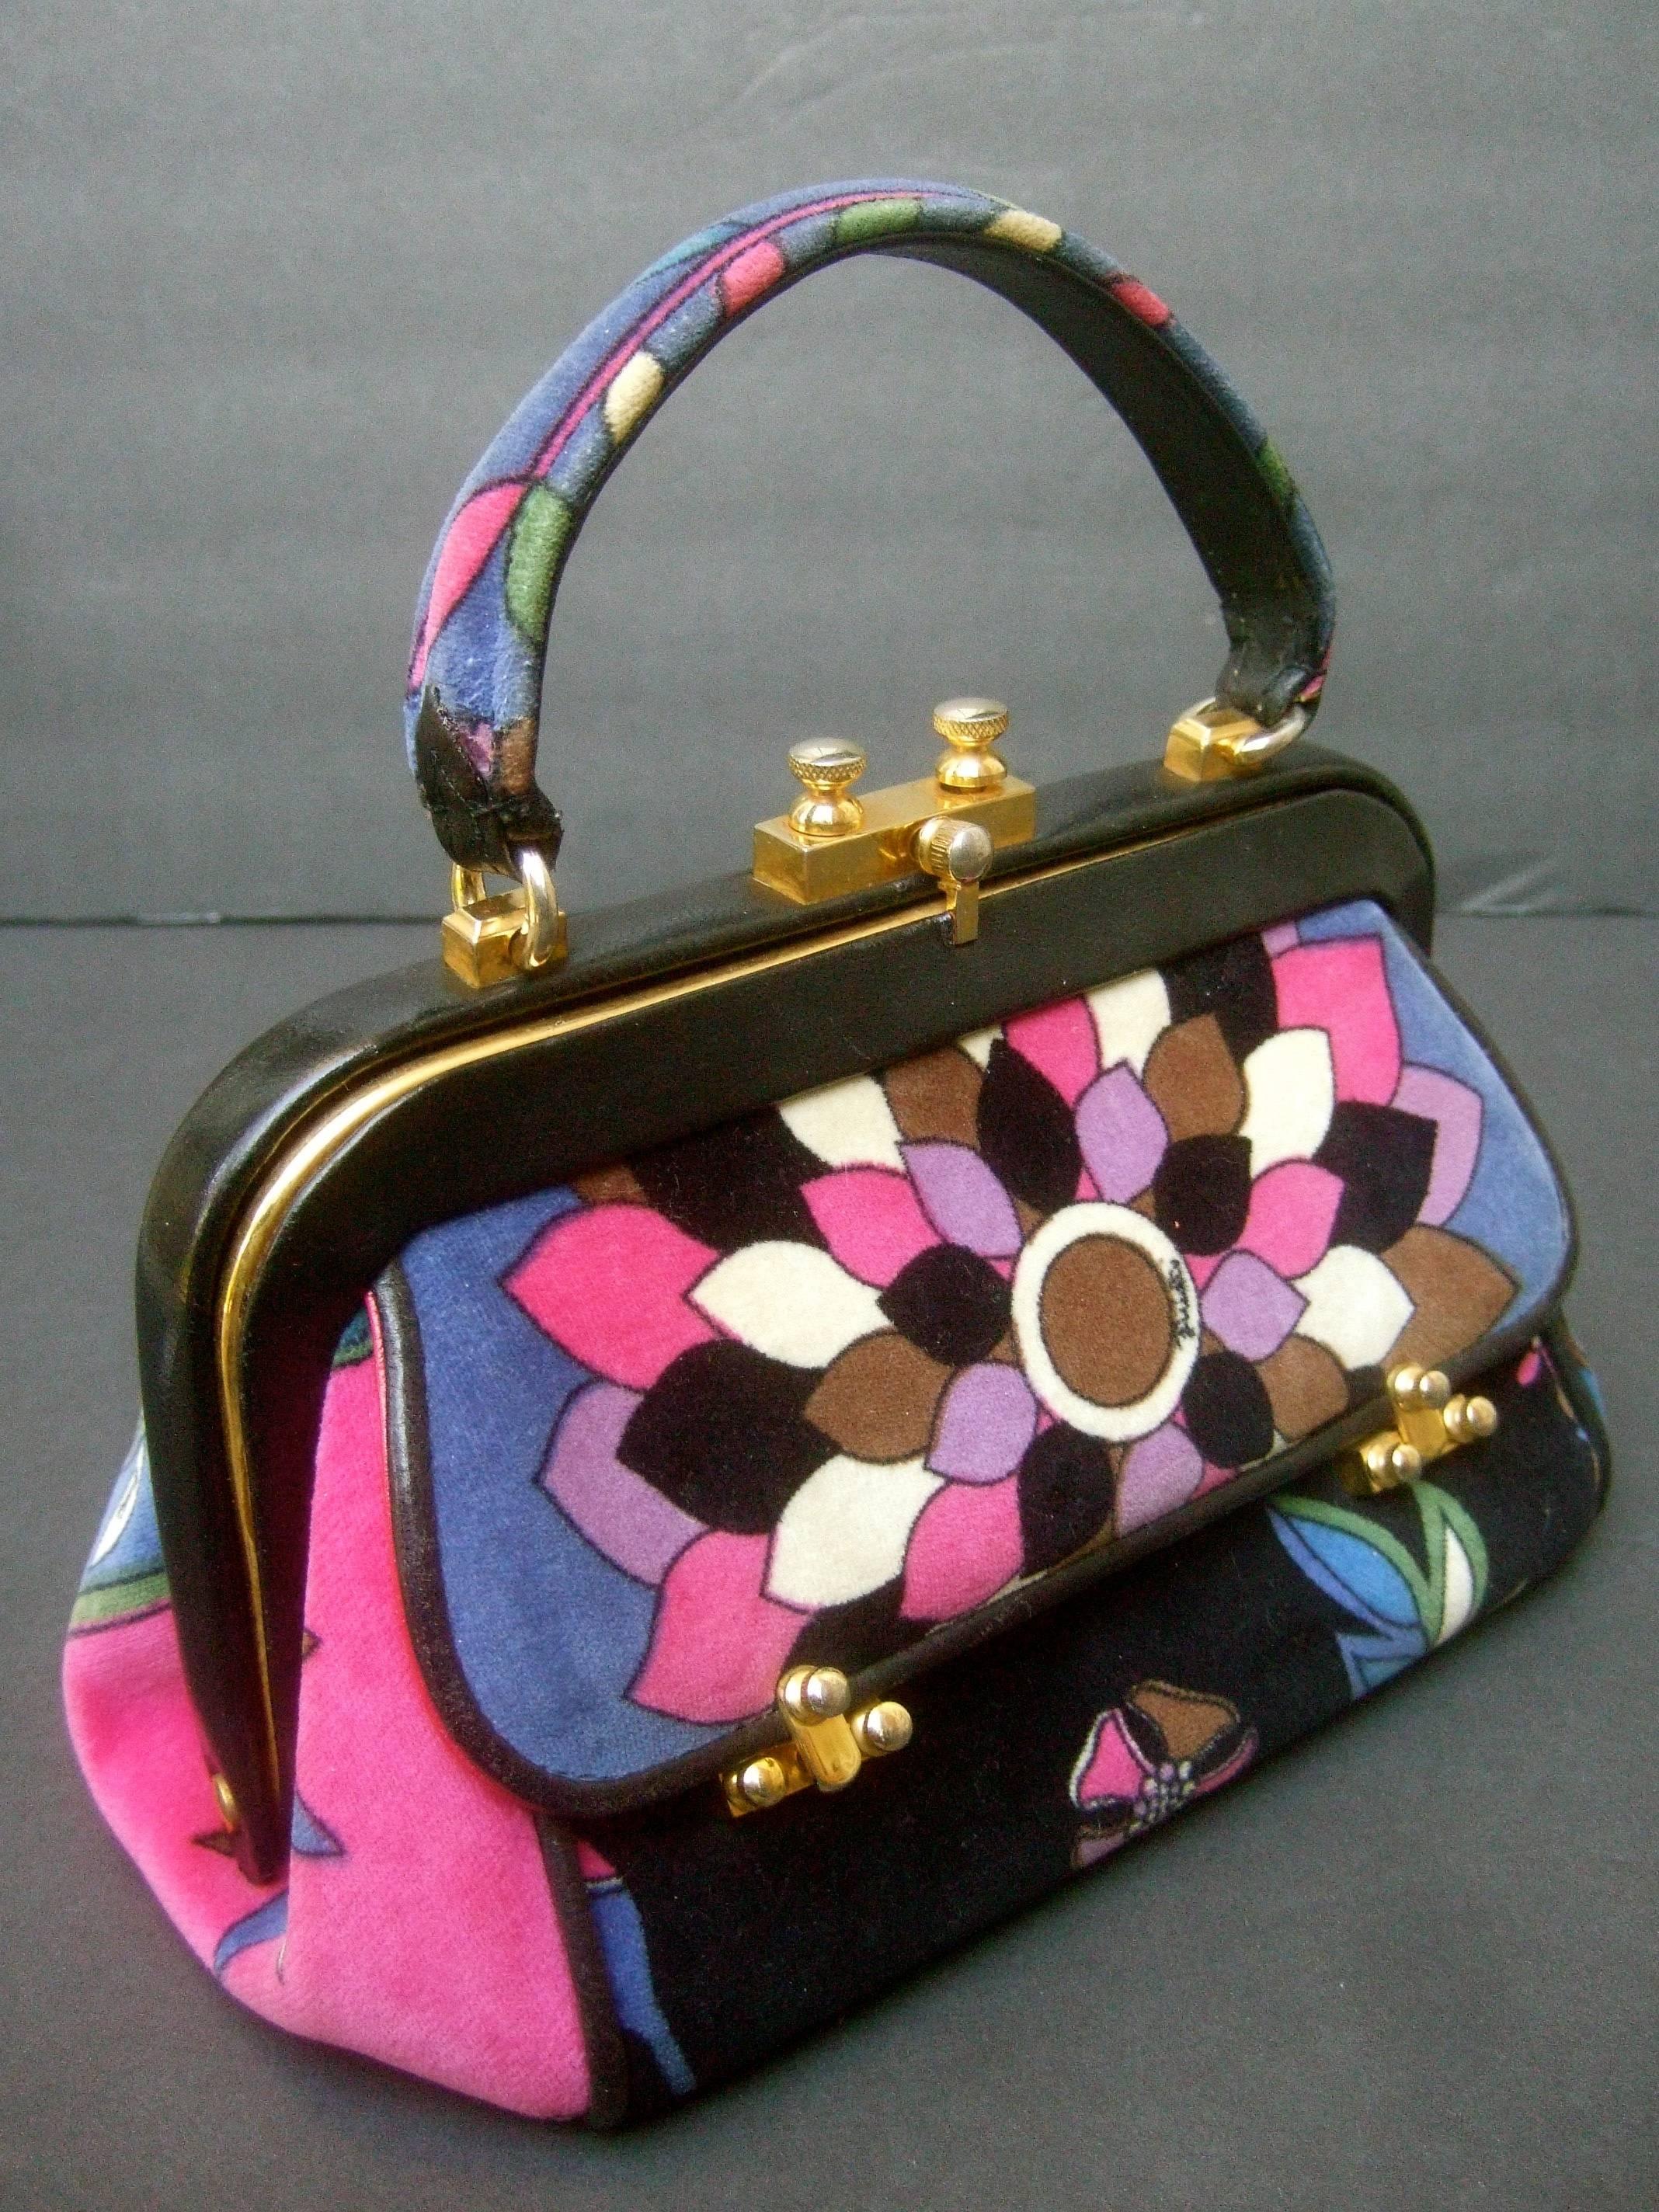 Emilio Pucci Rare velvet leather trim handbag ca 1970
The posh Italian handbag is covered with plush
cotton floral print velvet 

The velvet covering is illustrated with a mosaic 
of vibrant bold graphics with floral motifs
Emilio's script name is